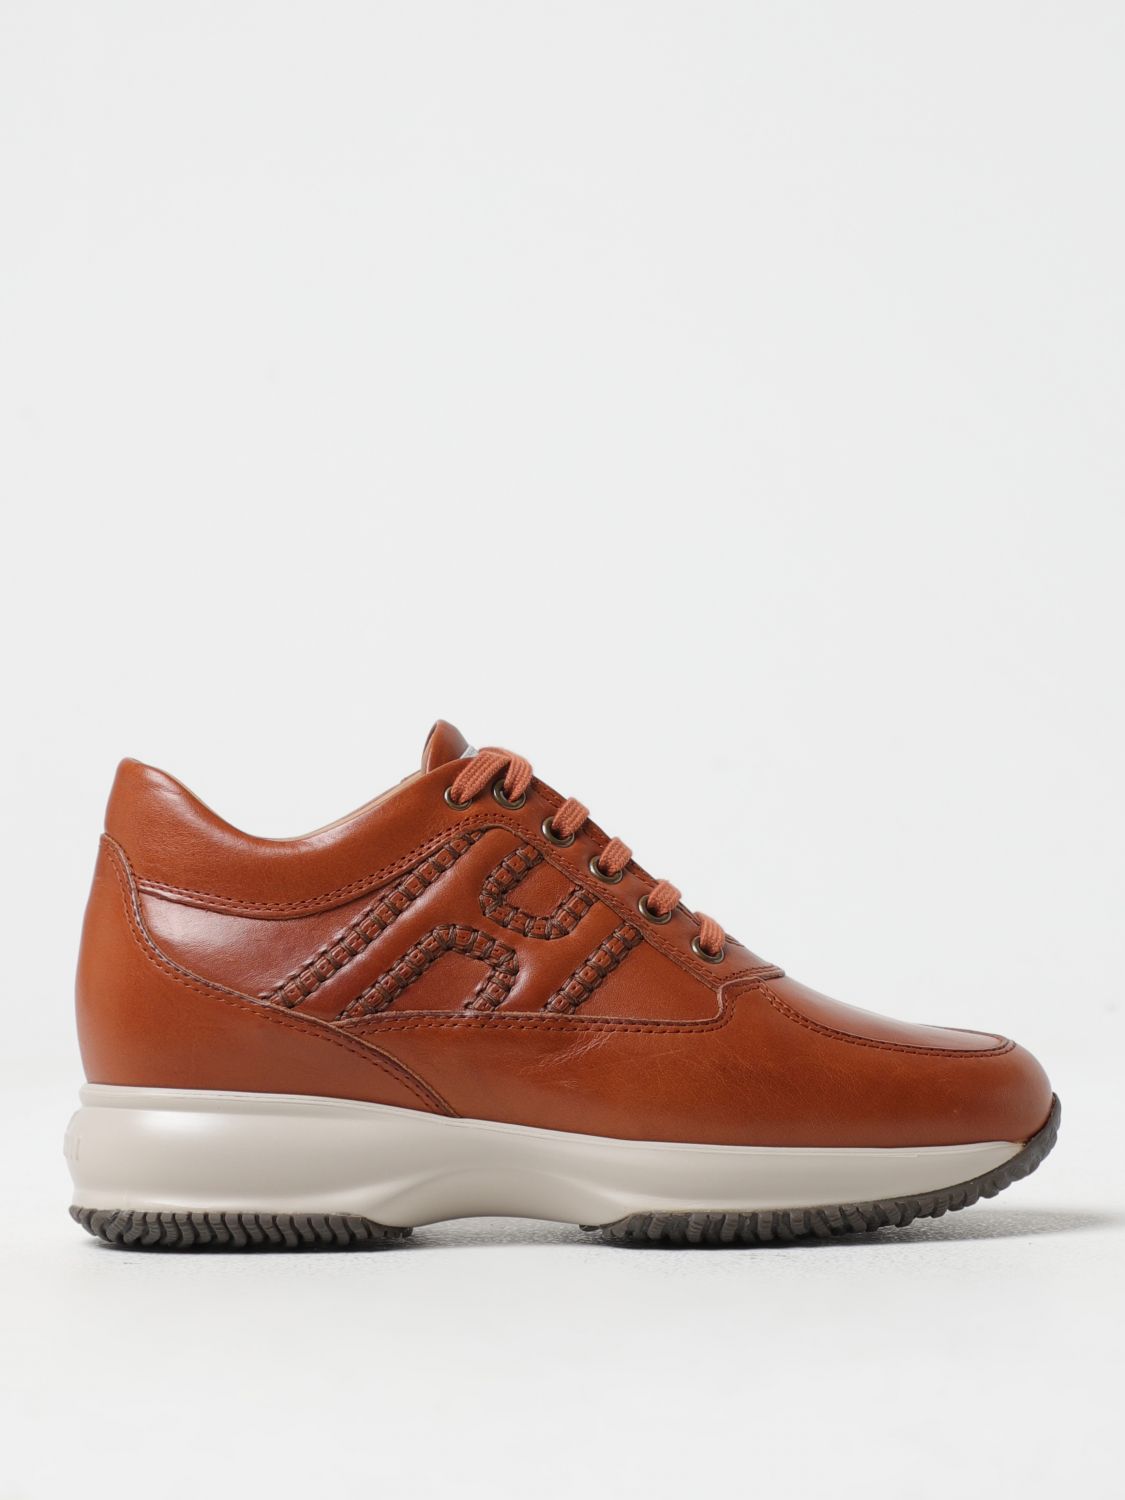 HOGAN INTERACTIVE LEATHER SNEAKERS,E72873107